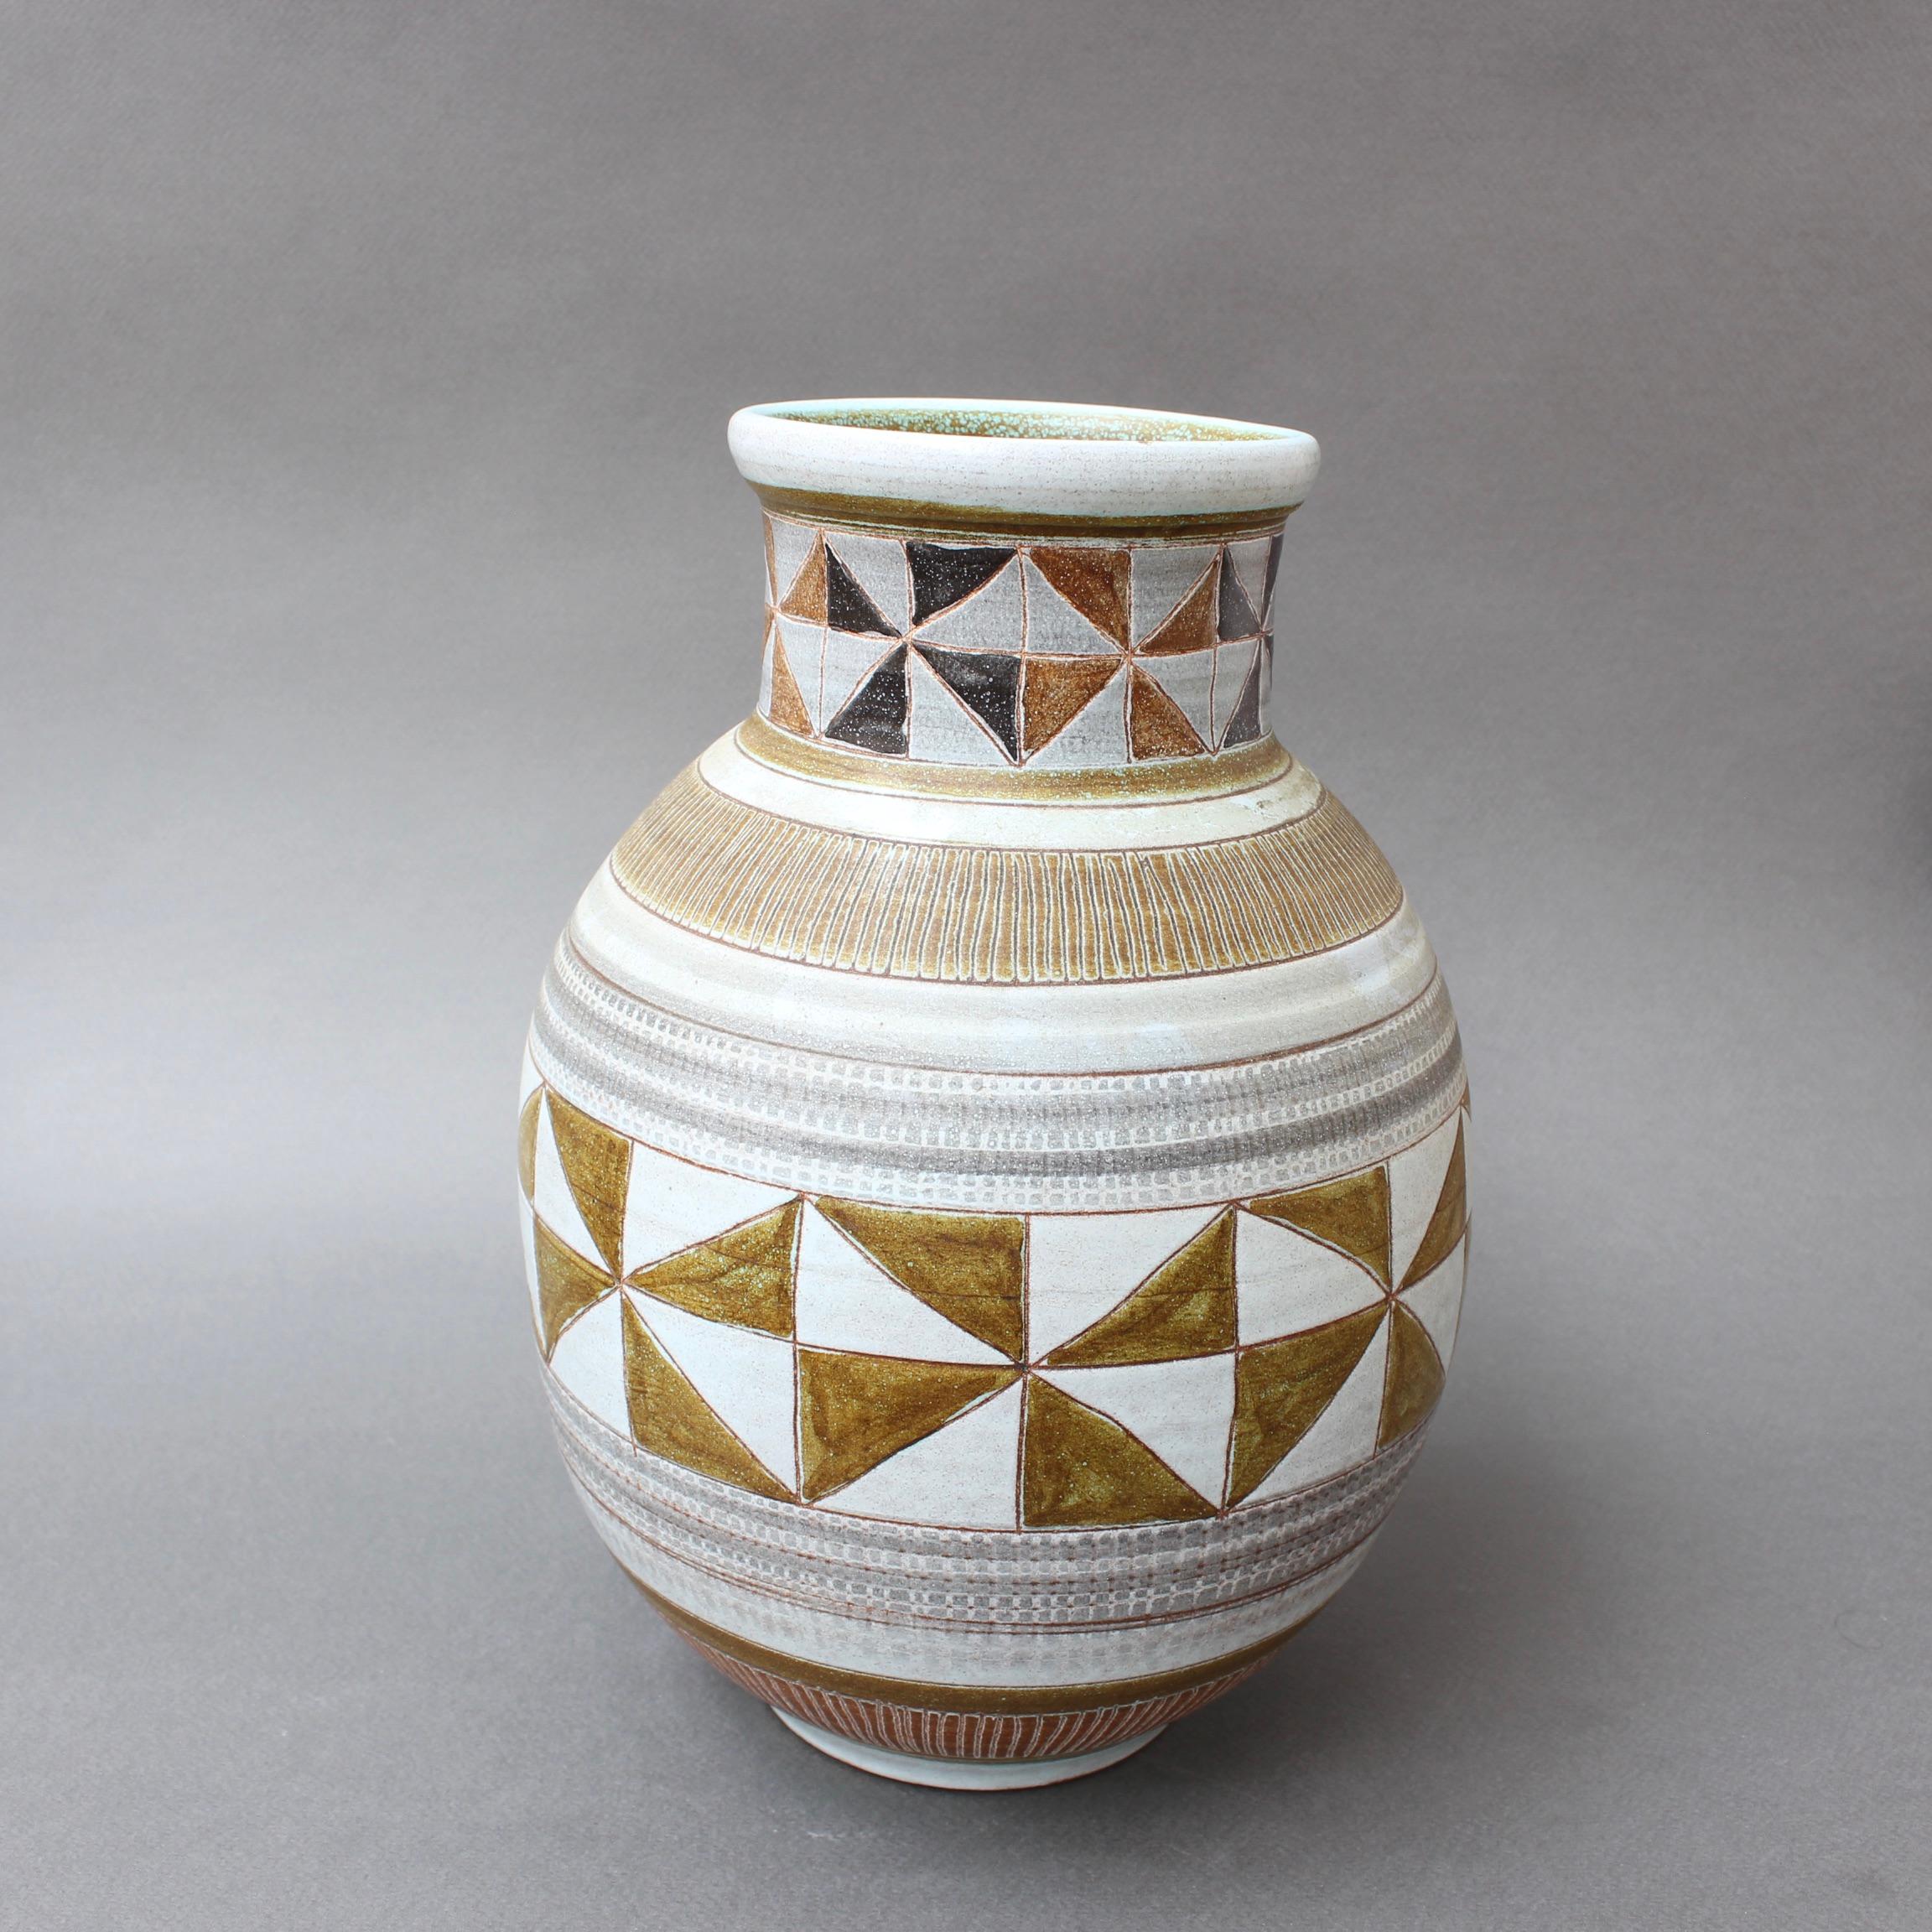 French Vintage Ceramic Vase by Dominique Guillot, circa 1960s